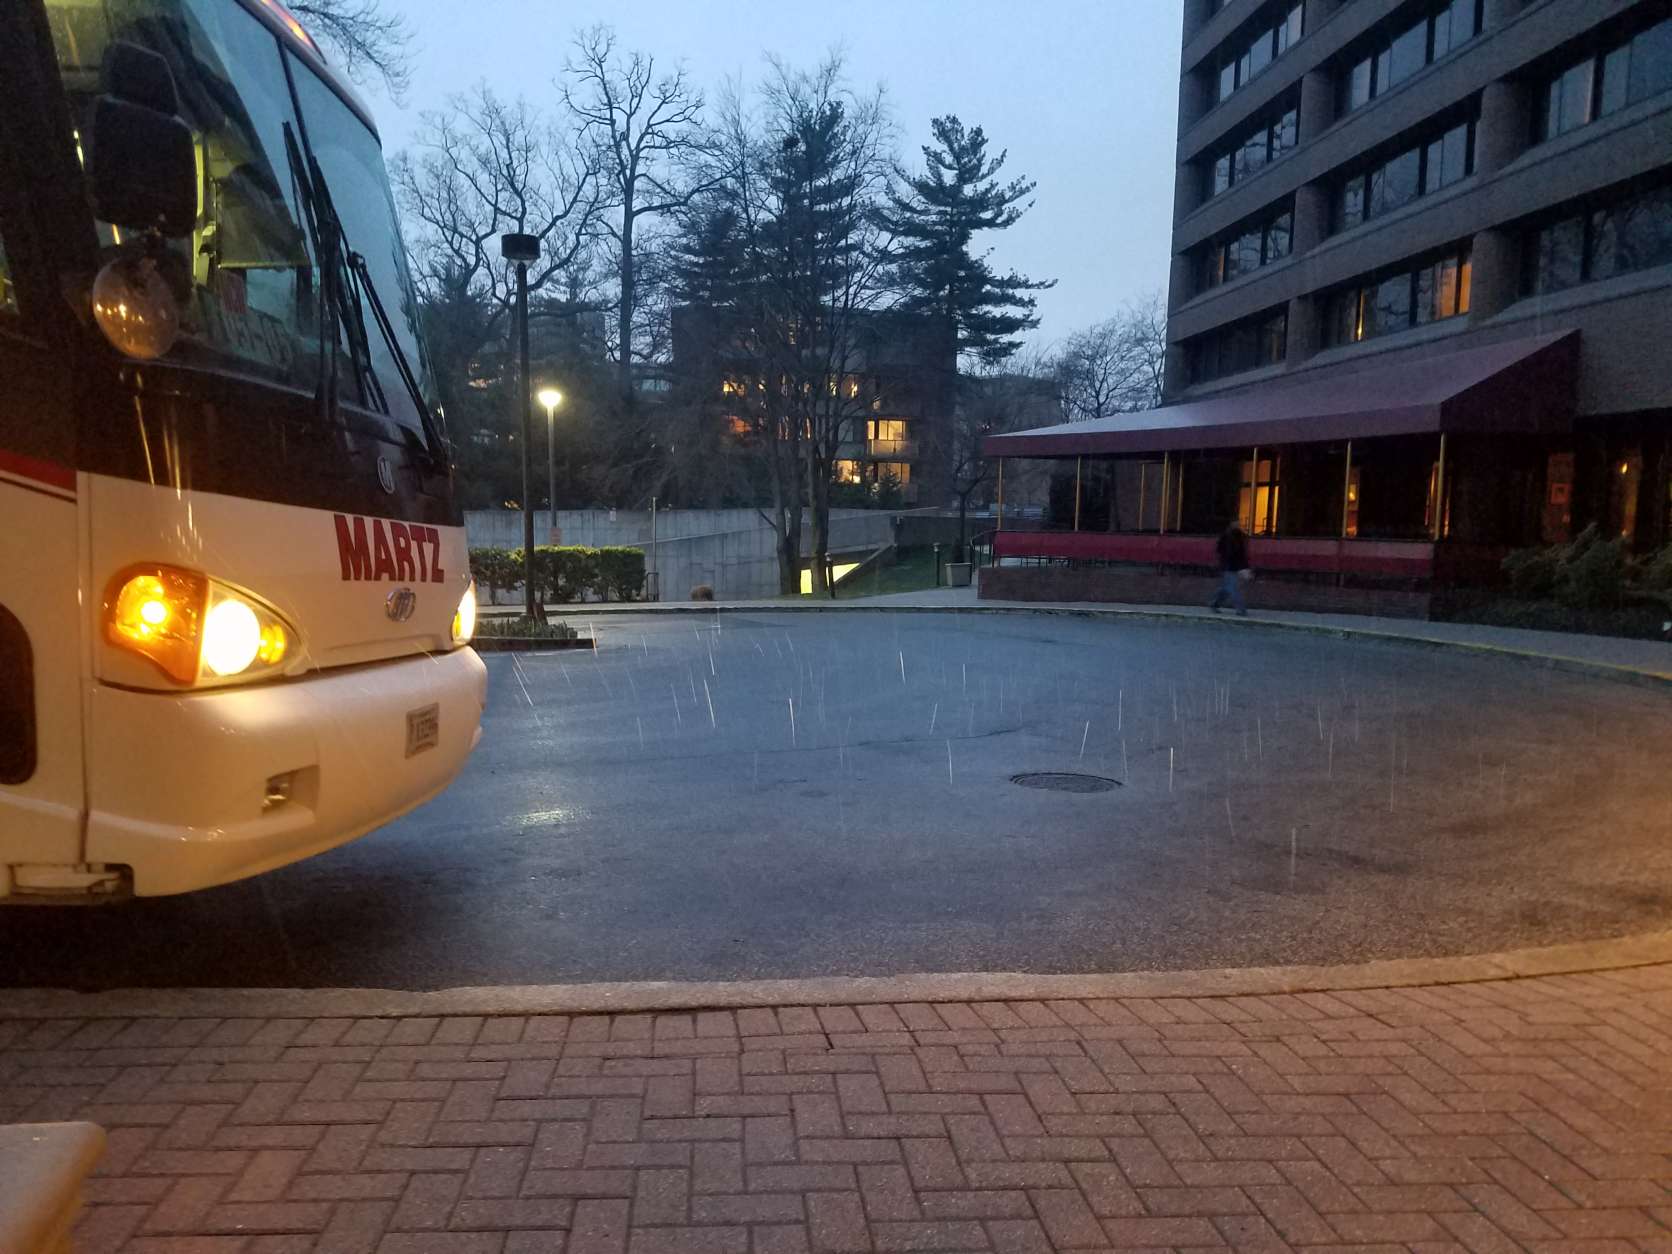 Snow starting falling in D.C. NW a little after 7 p.m. Monday. (WTOP/William Vitka)